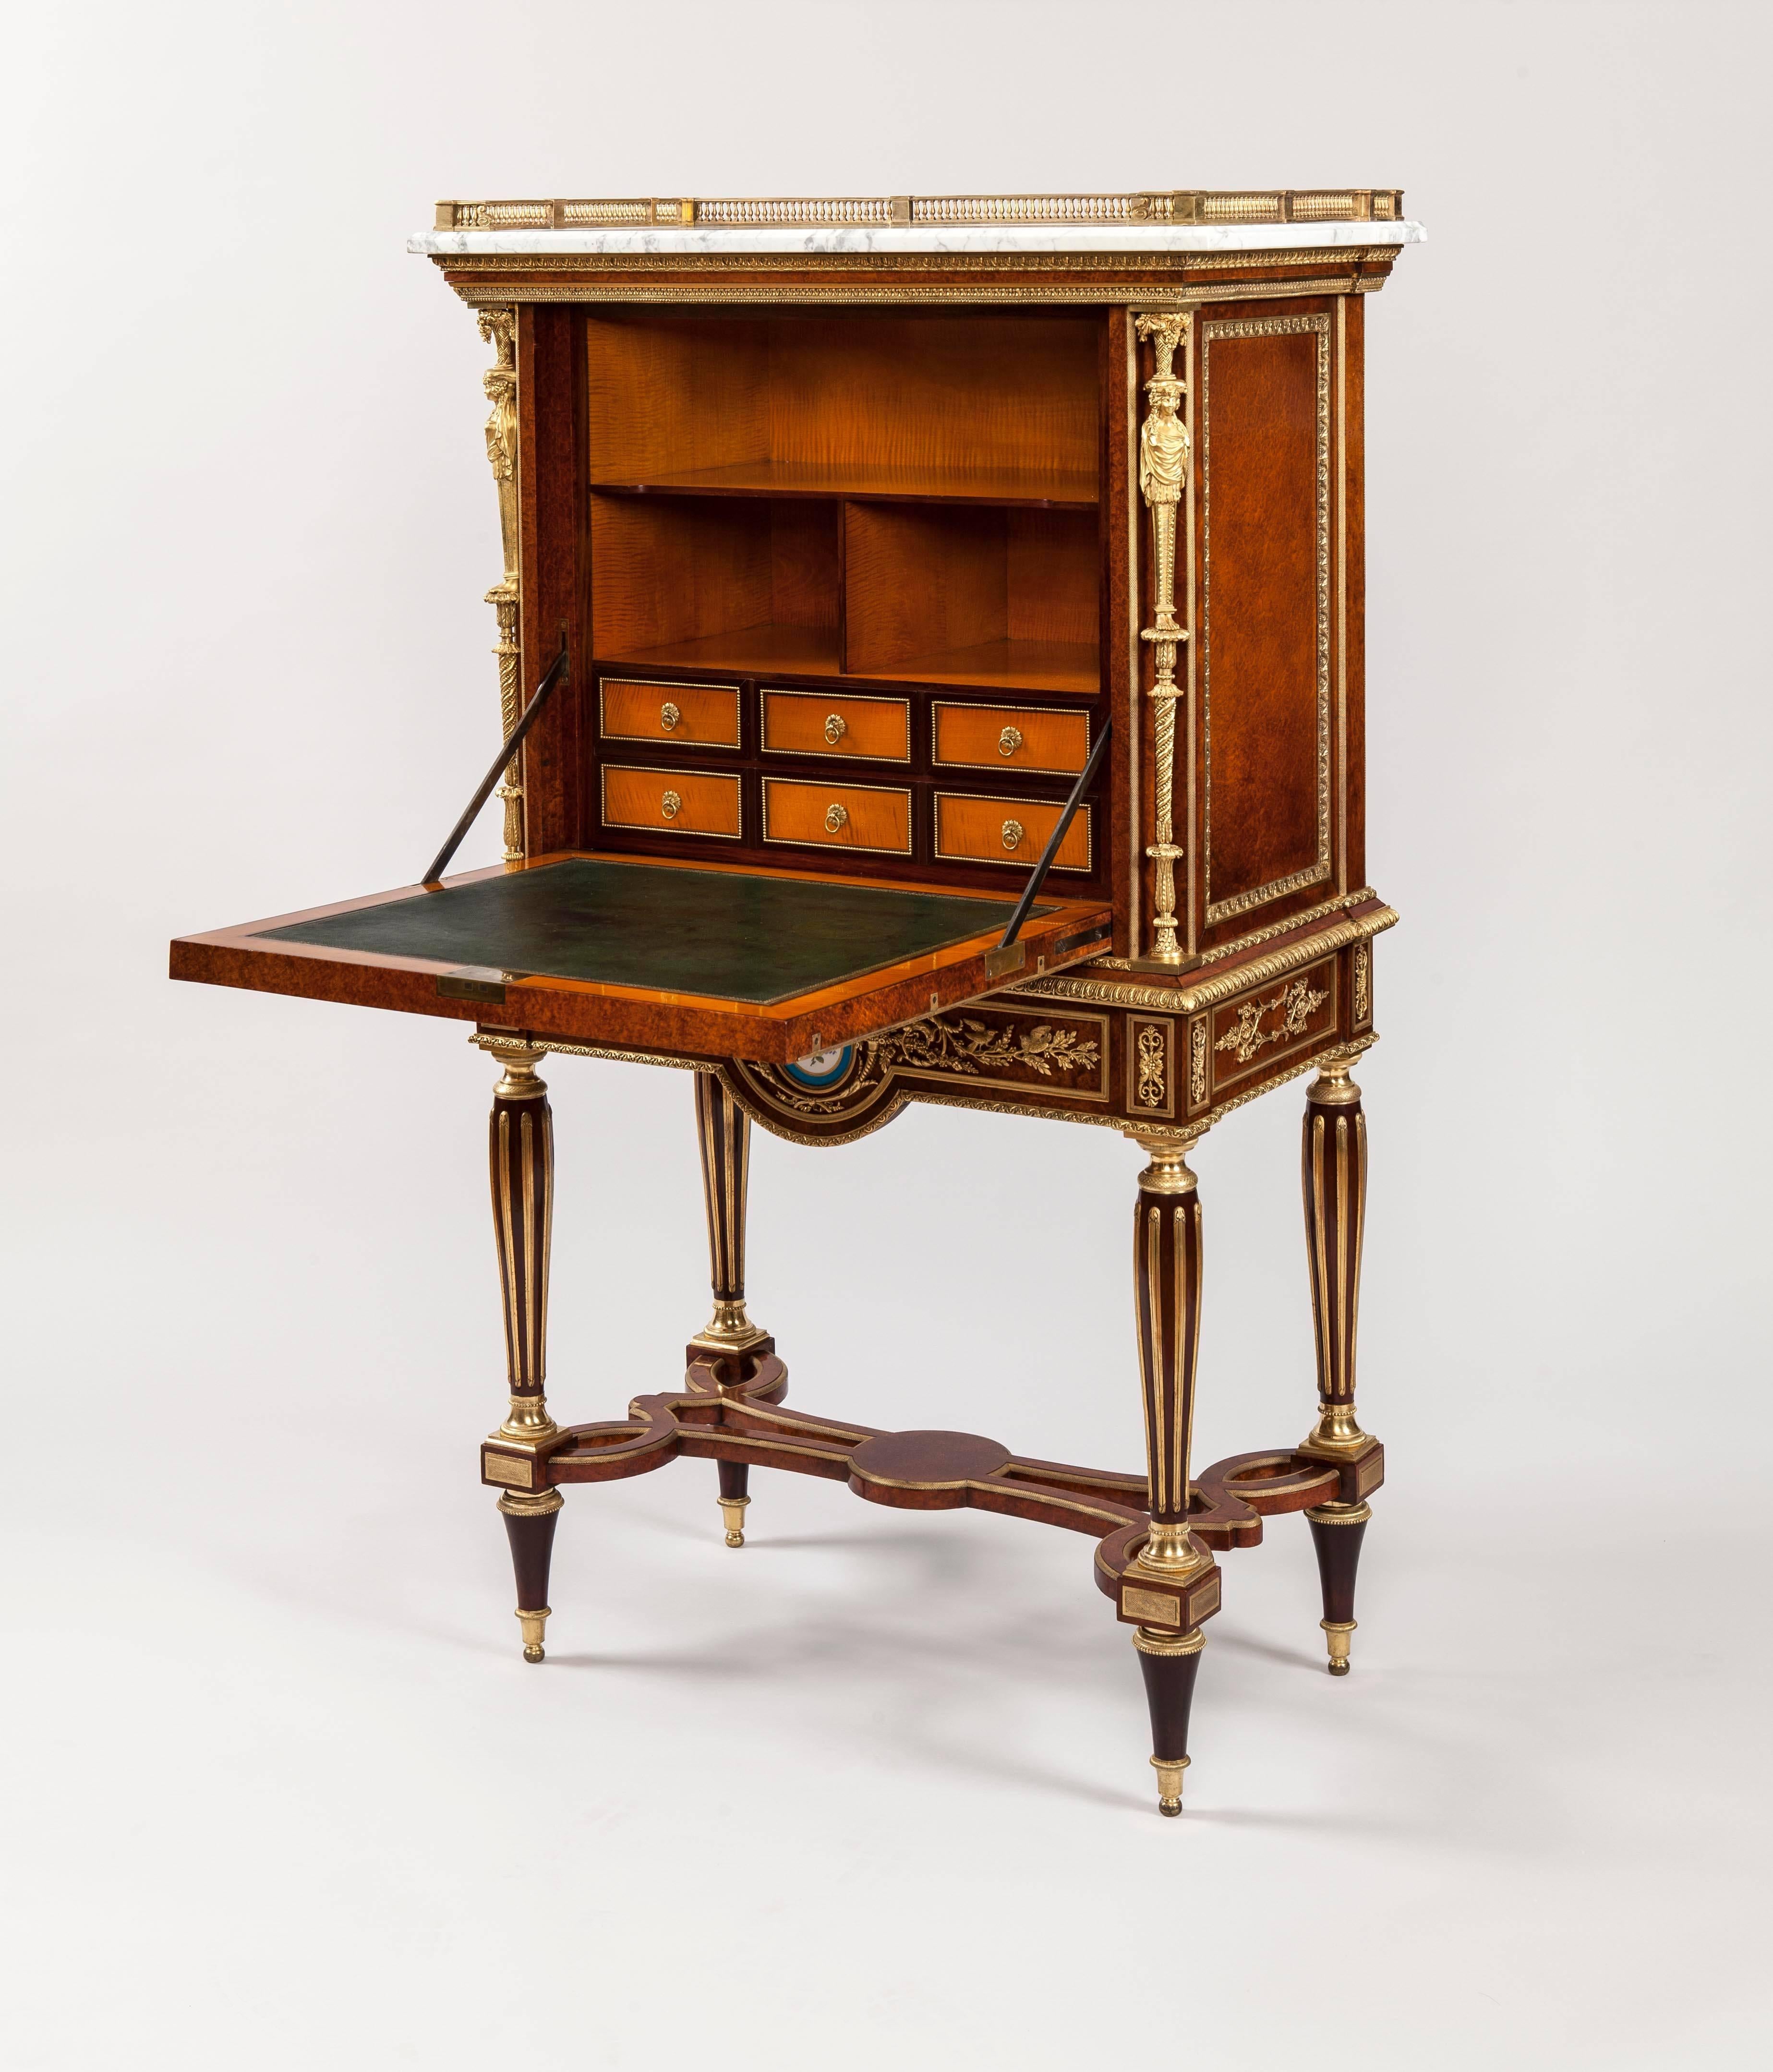 A fine Escritoire After a Design by Adam Weisweiler

Constructed in amboyna, dressed with blue and white floral ‘Sevres’ porcelain plaques and gold gilt bronze mounts; rising from tapering circular legs, inlaid with brass, having bronze bases and